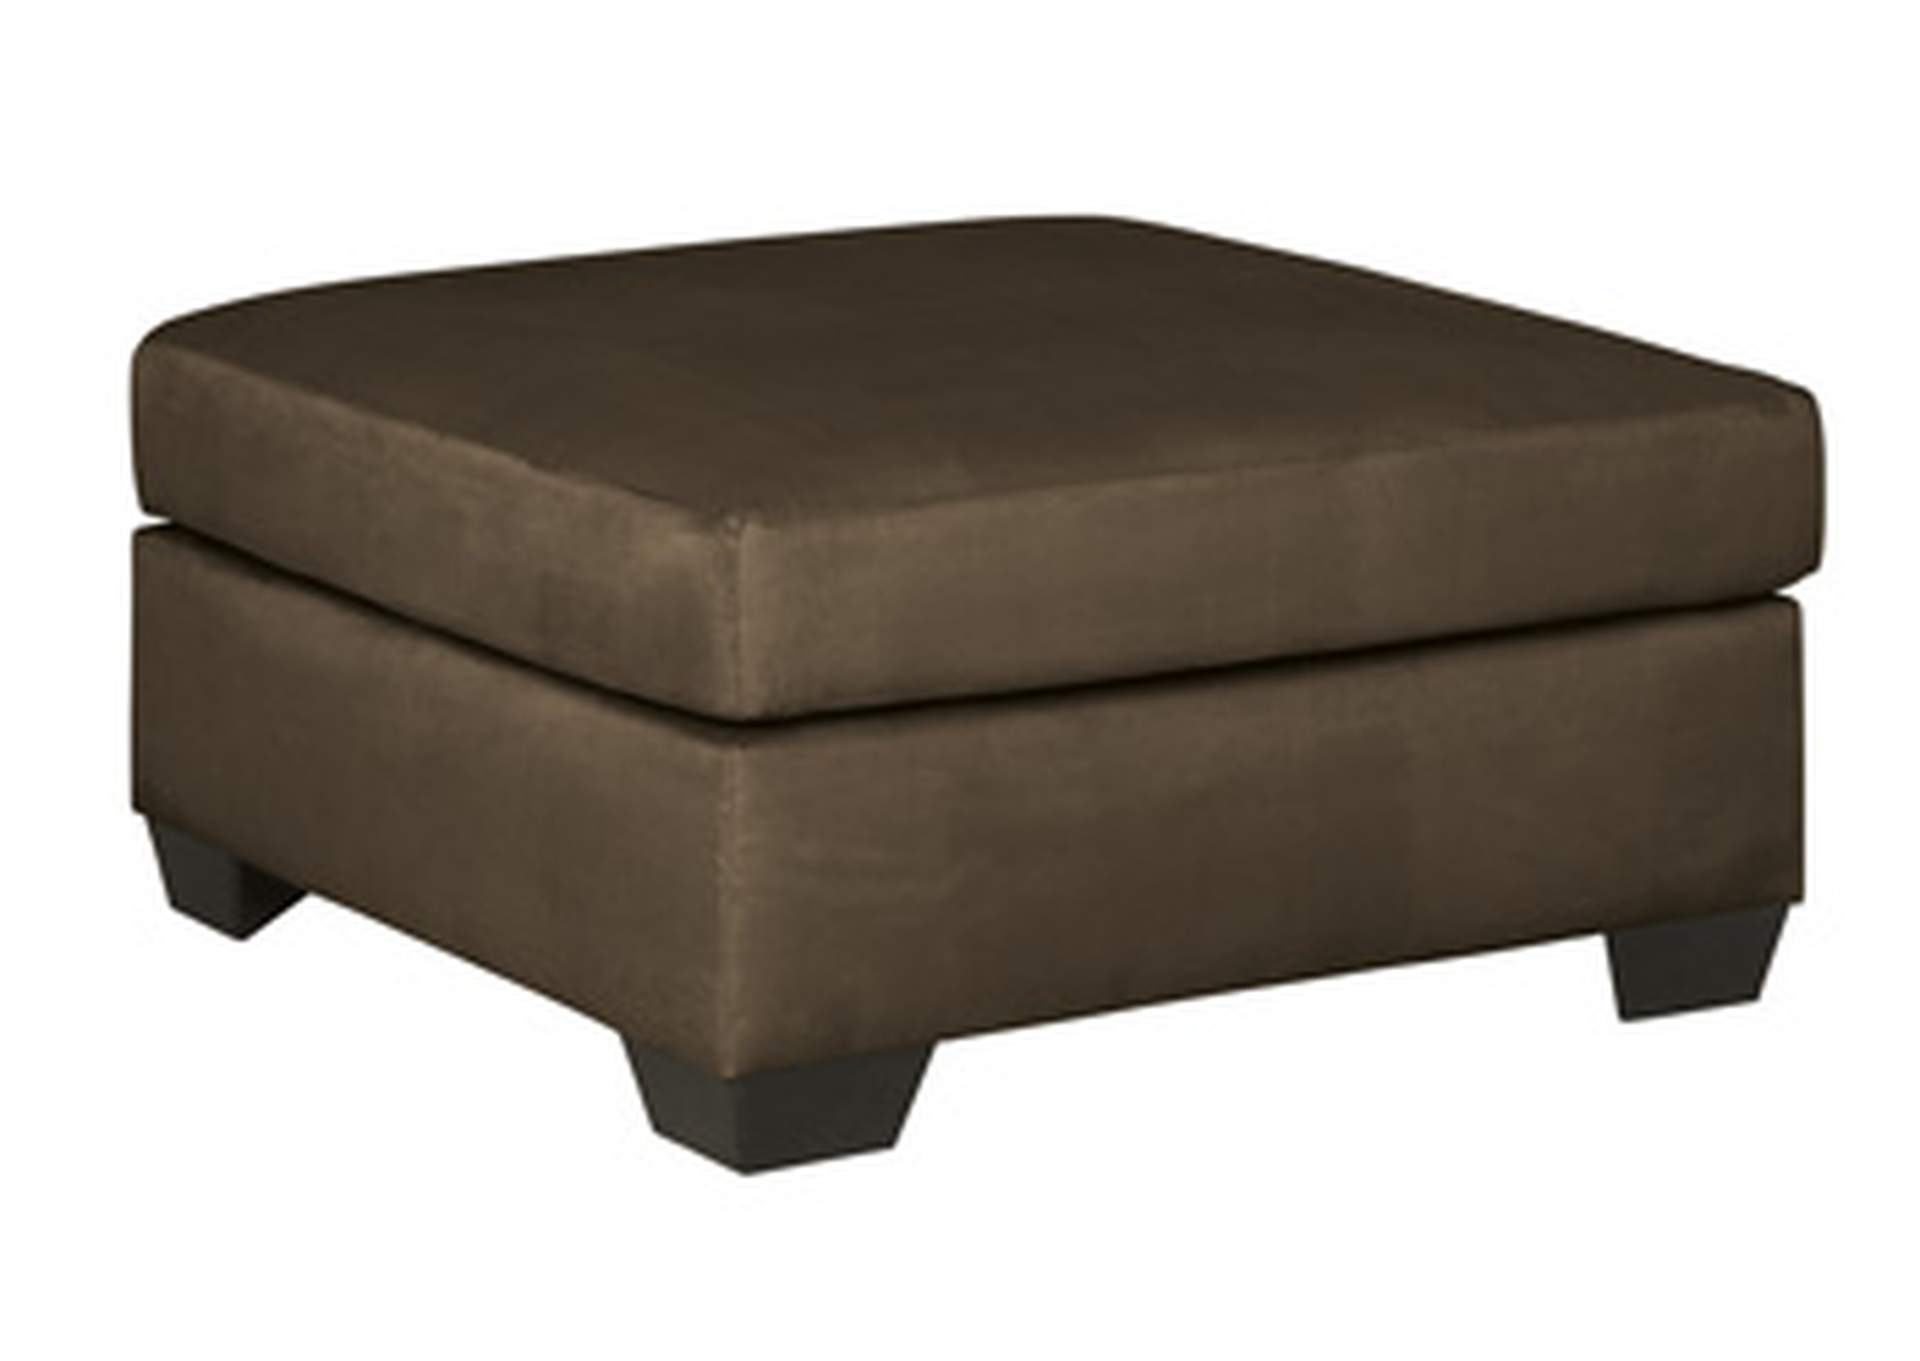 Darcy Oversized Accent Ottoman,September 21 2022 eCircular